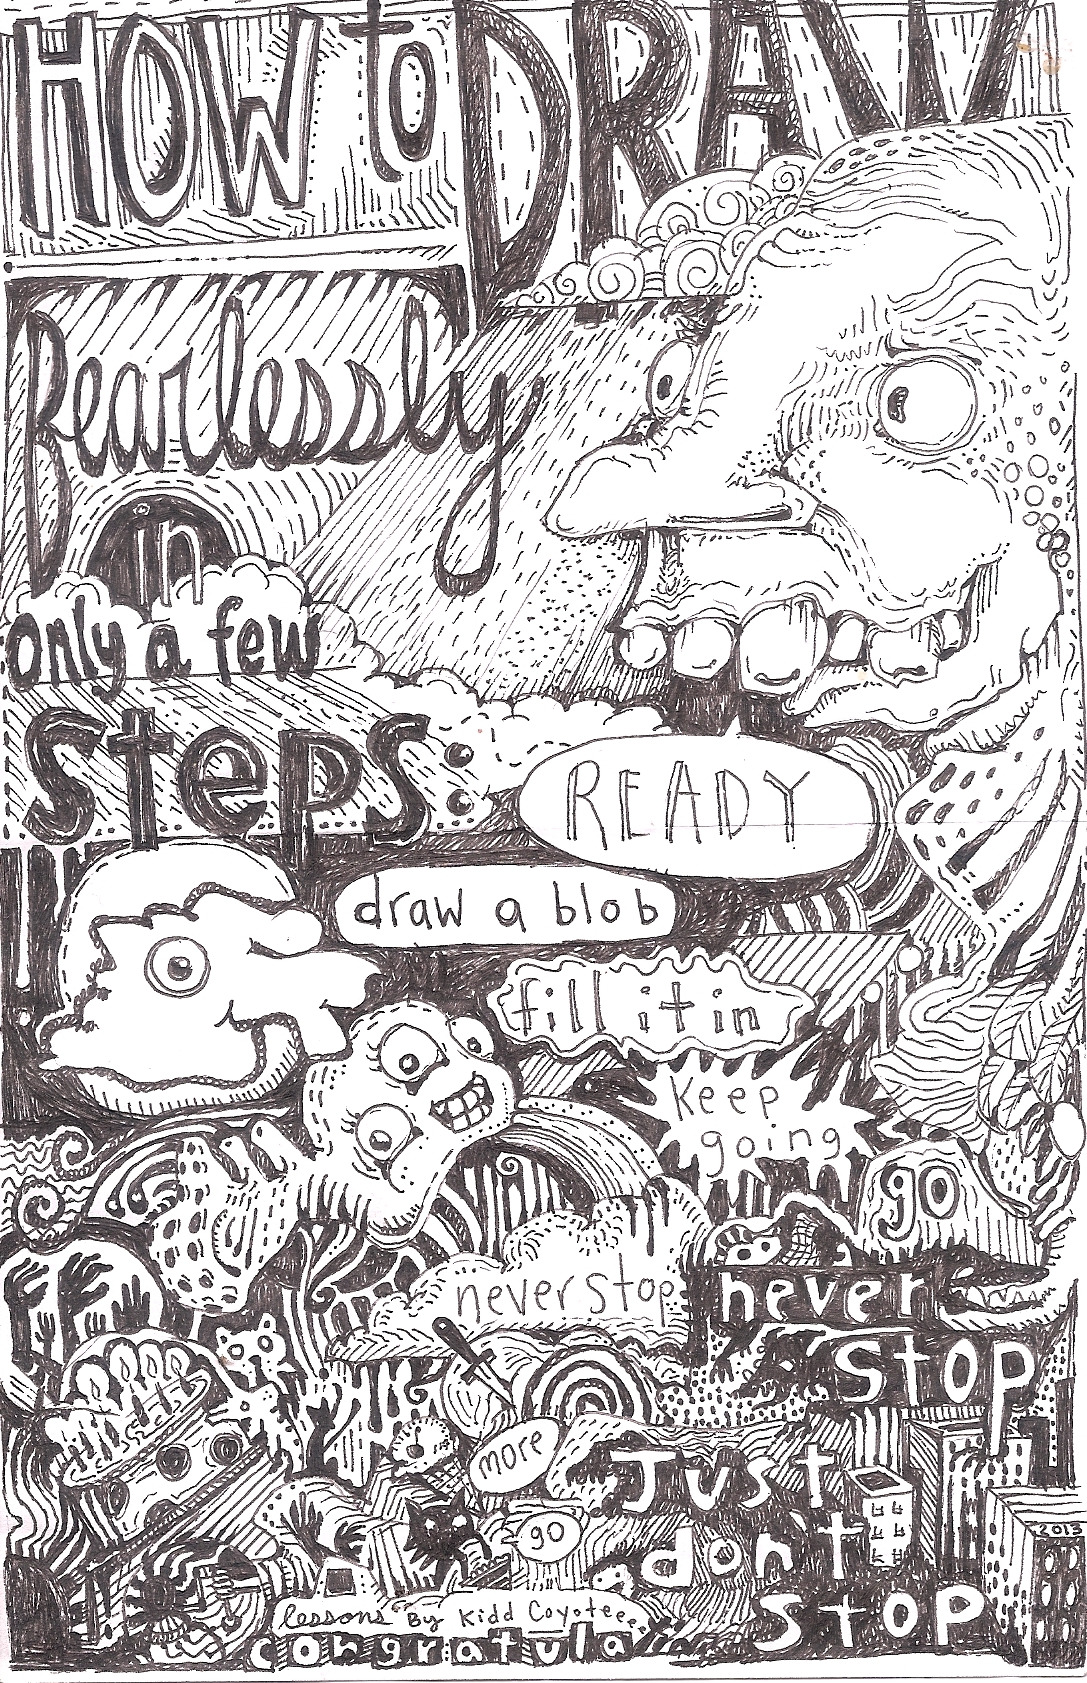 'How to draw' ink on crappy paper by kidd coyote indoors pacific northwest, usa monsterperks.tumblr.com